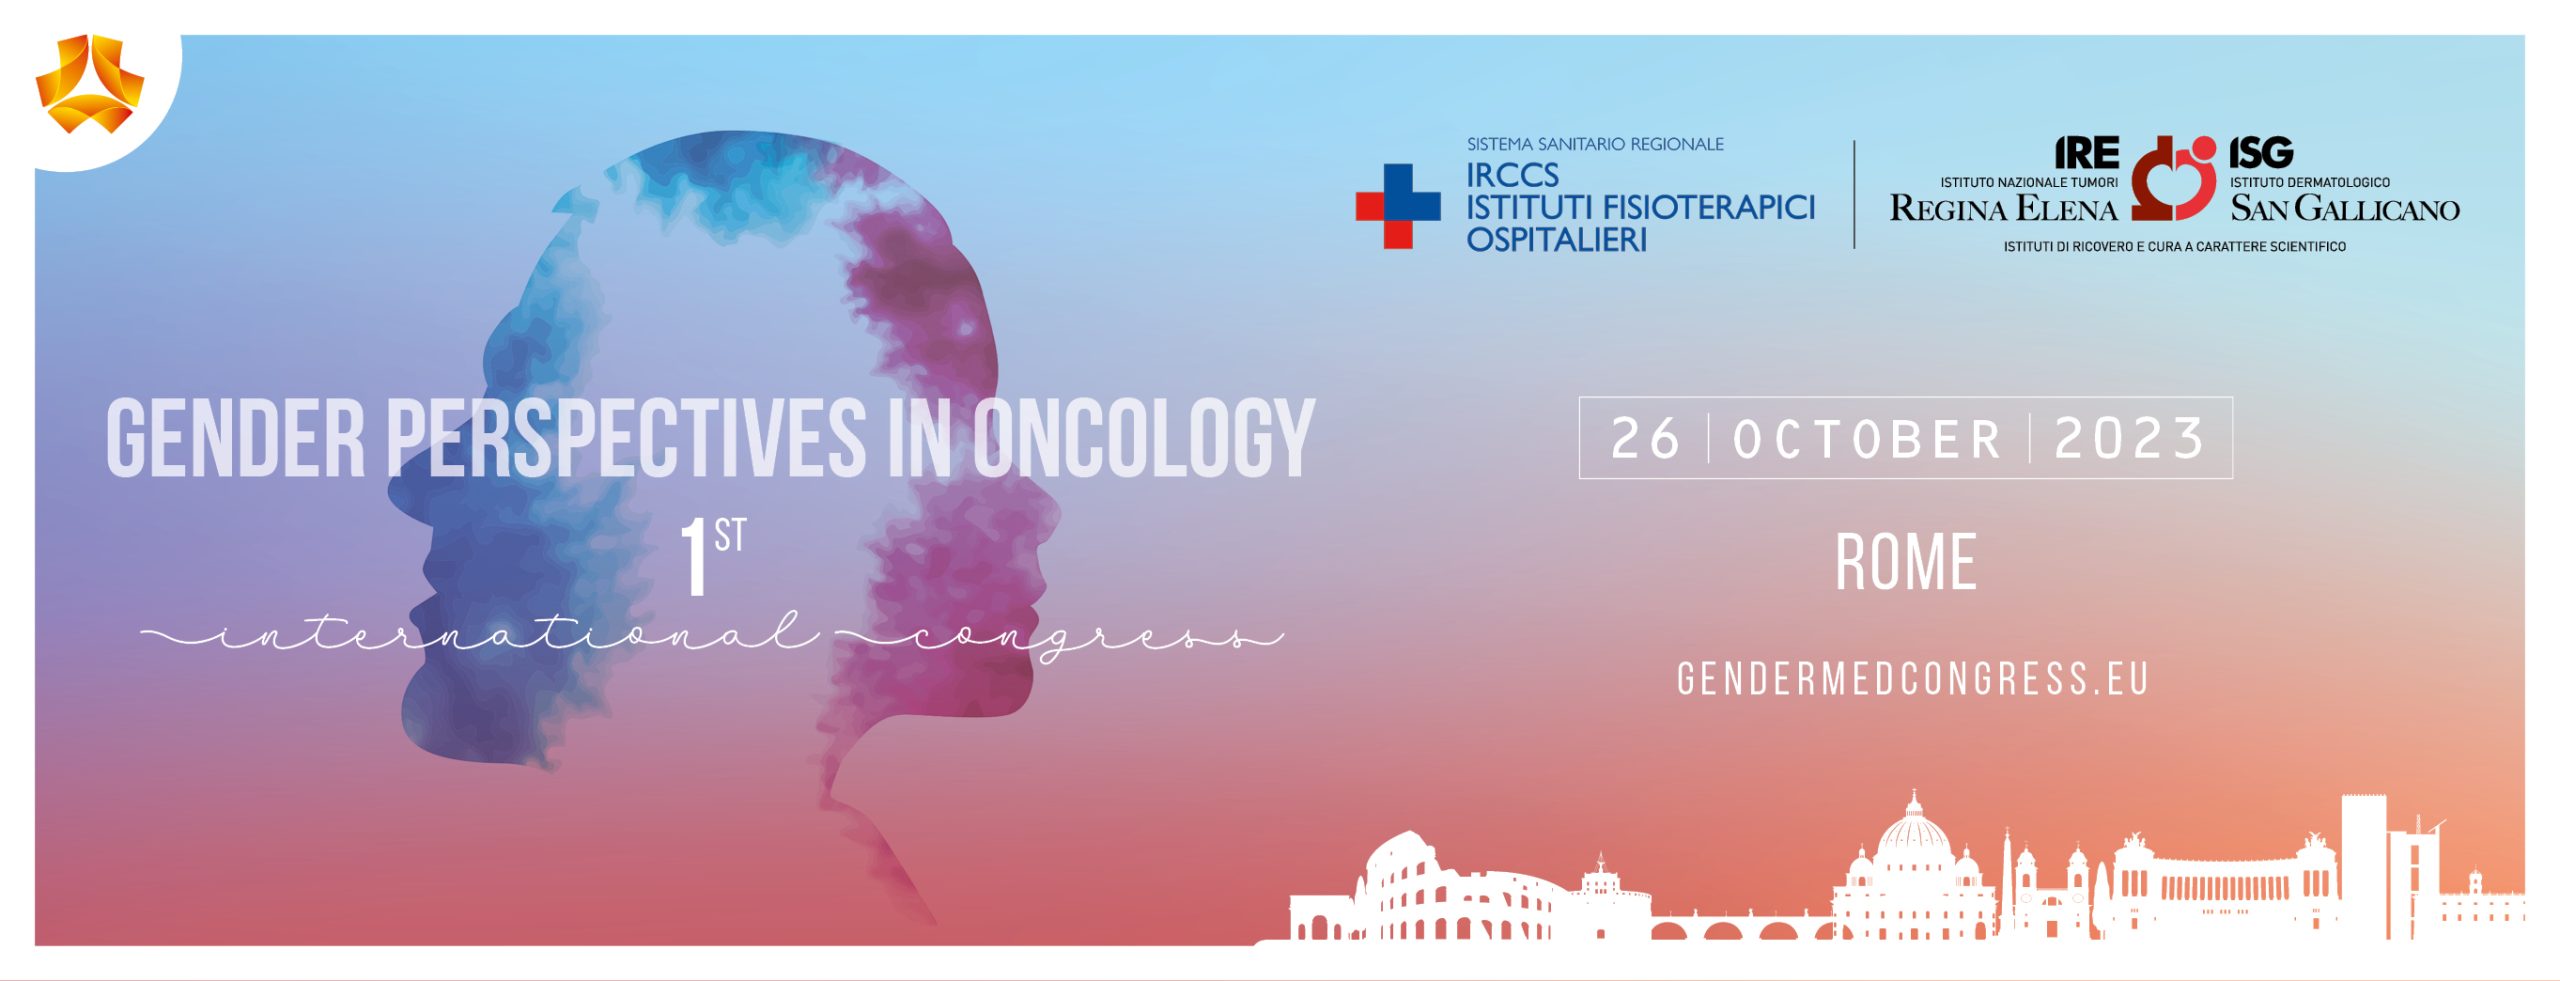 Gender Perspectives In Oncology International Congress 2023